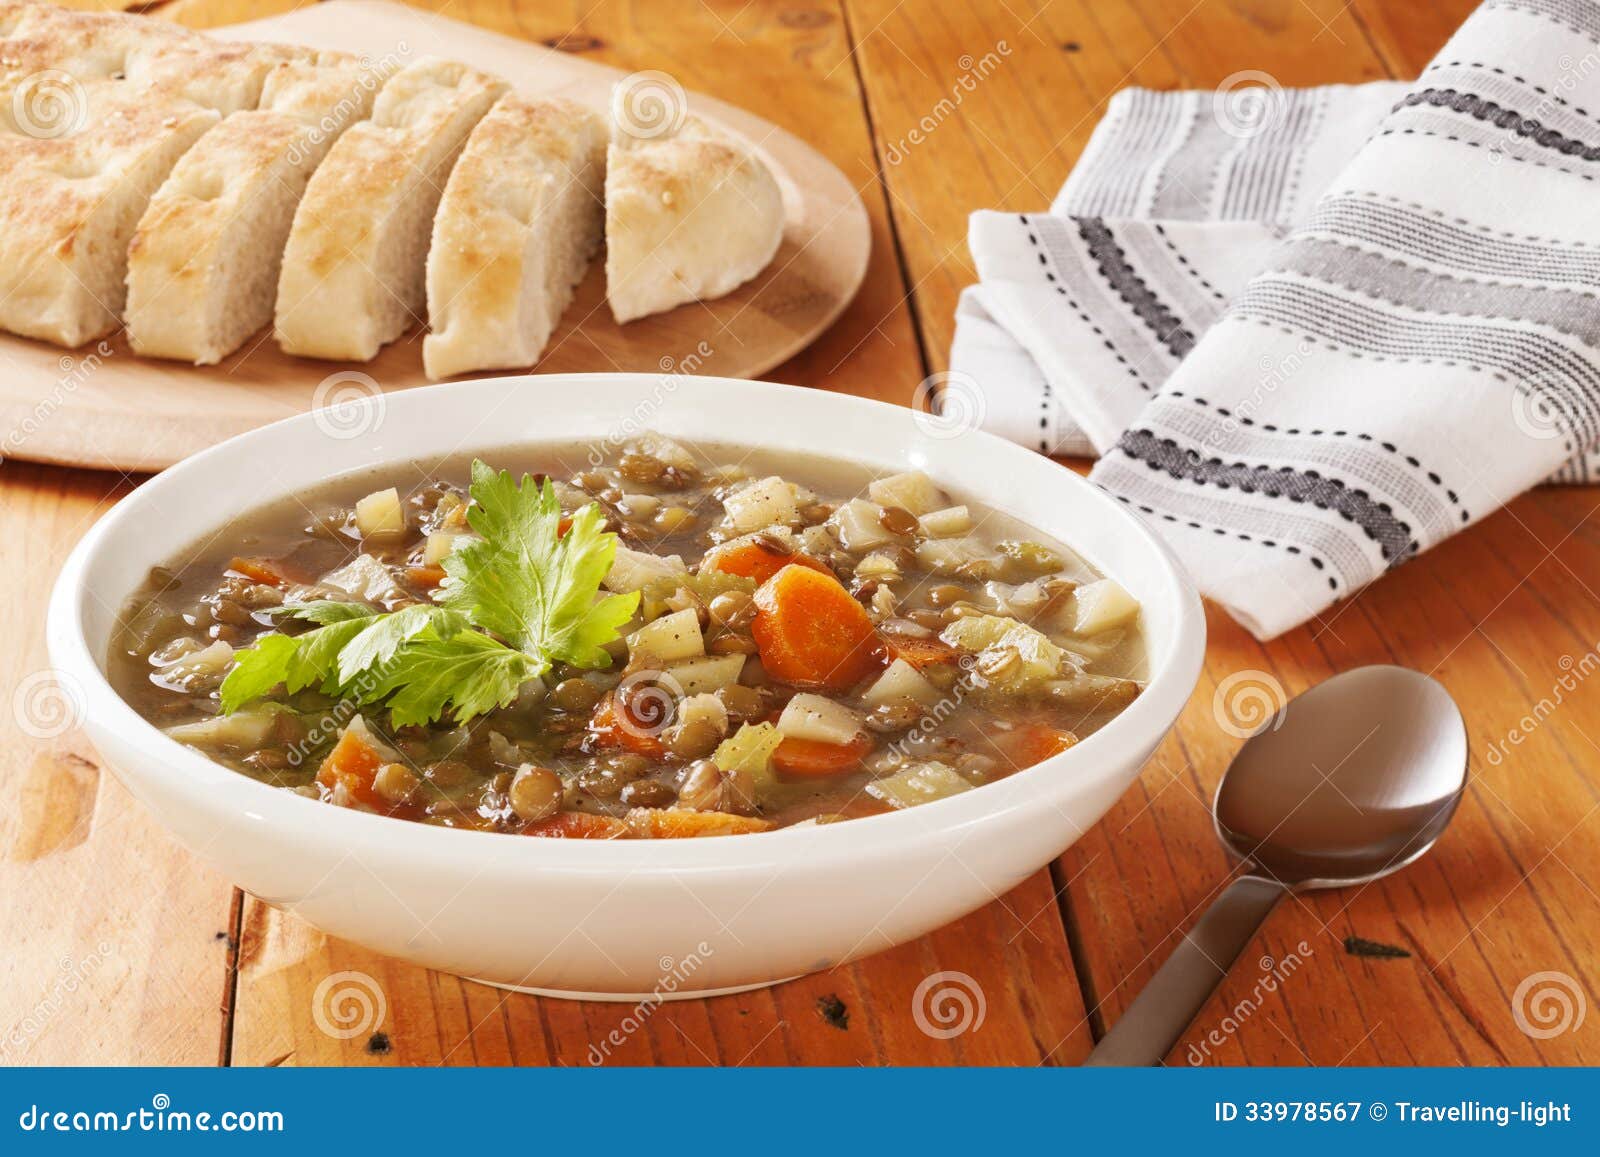 green lentil soup and bread